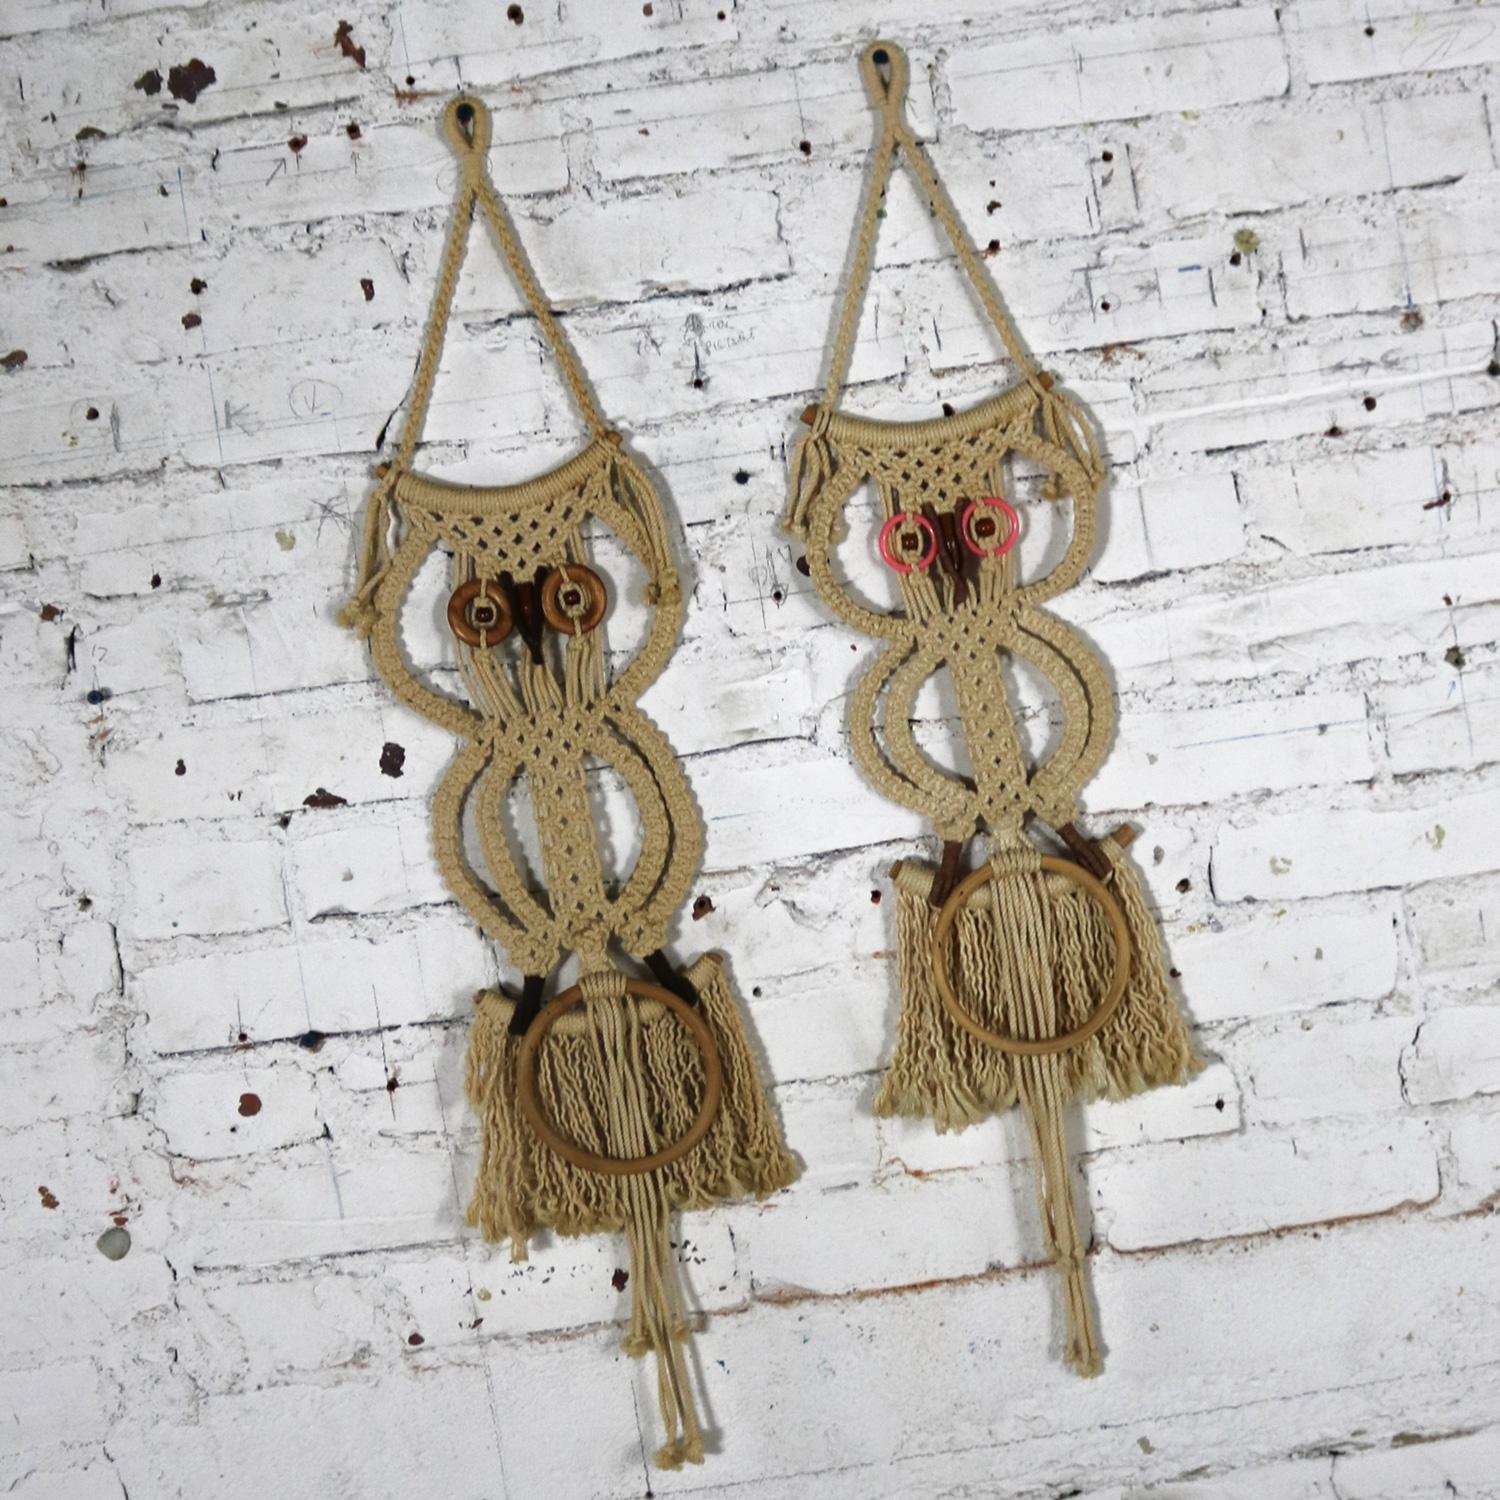 Fabulous pair of mid-century modern or Boho Chic macrame owl wall hangings or towel rings. Beautiful condition, keeping in mind that these are vintage and not new so will have signs of use and wear even if it has been refinished or restored. This